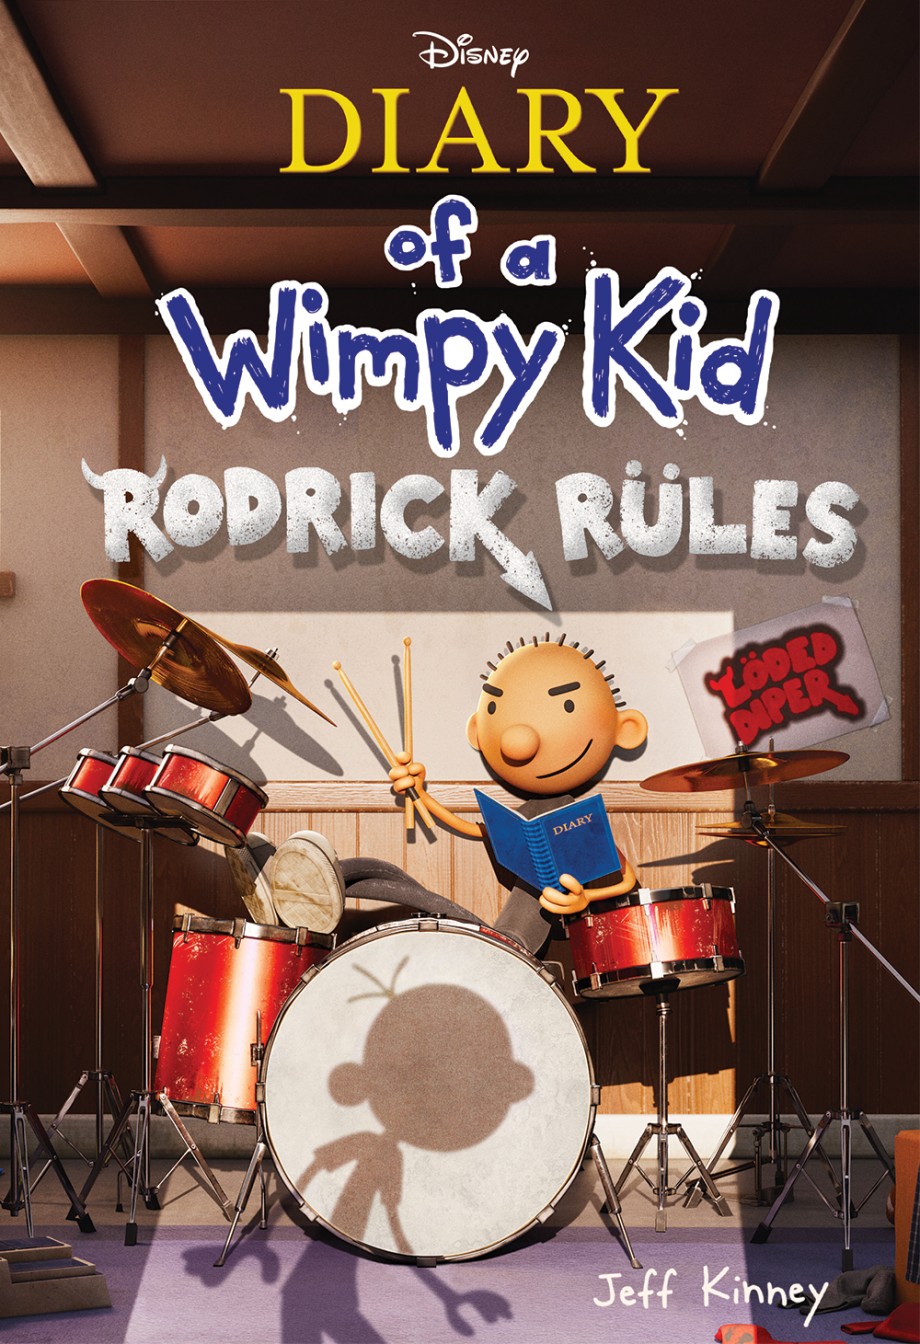 Rodrick Rules (Special Disney+ Cover Edition) (Diary of a Wimpy Kid #2) 